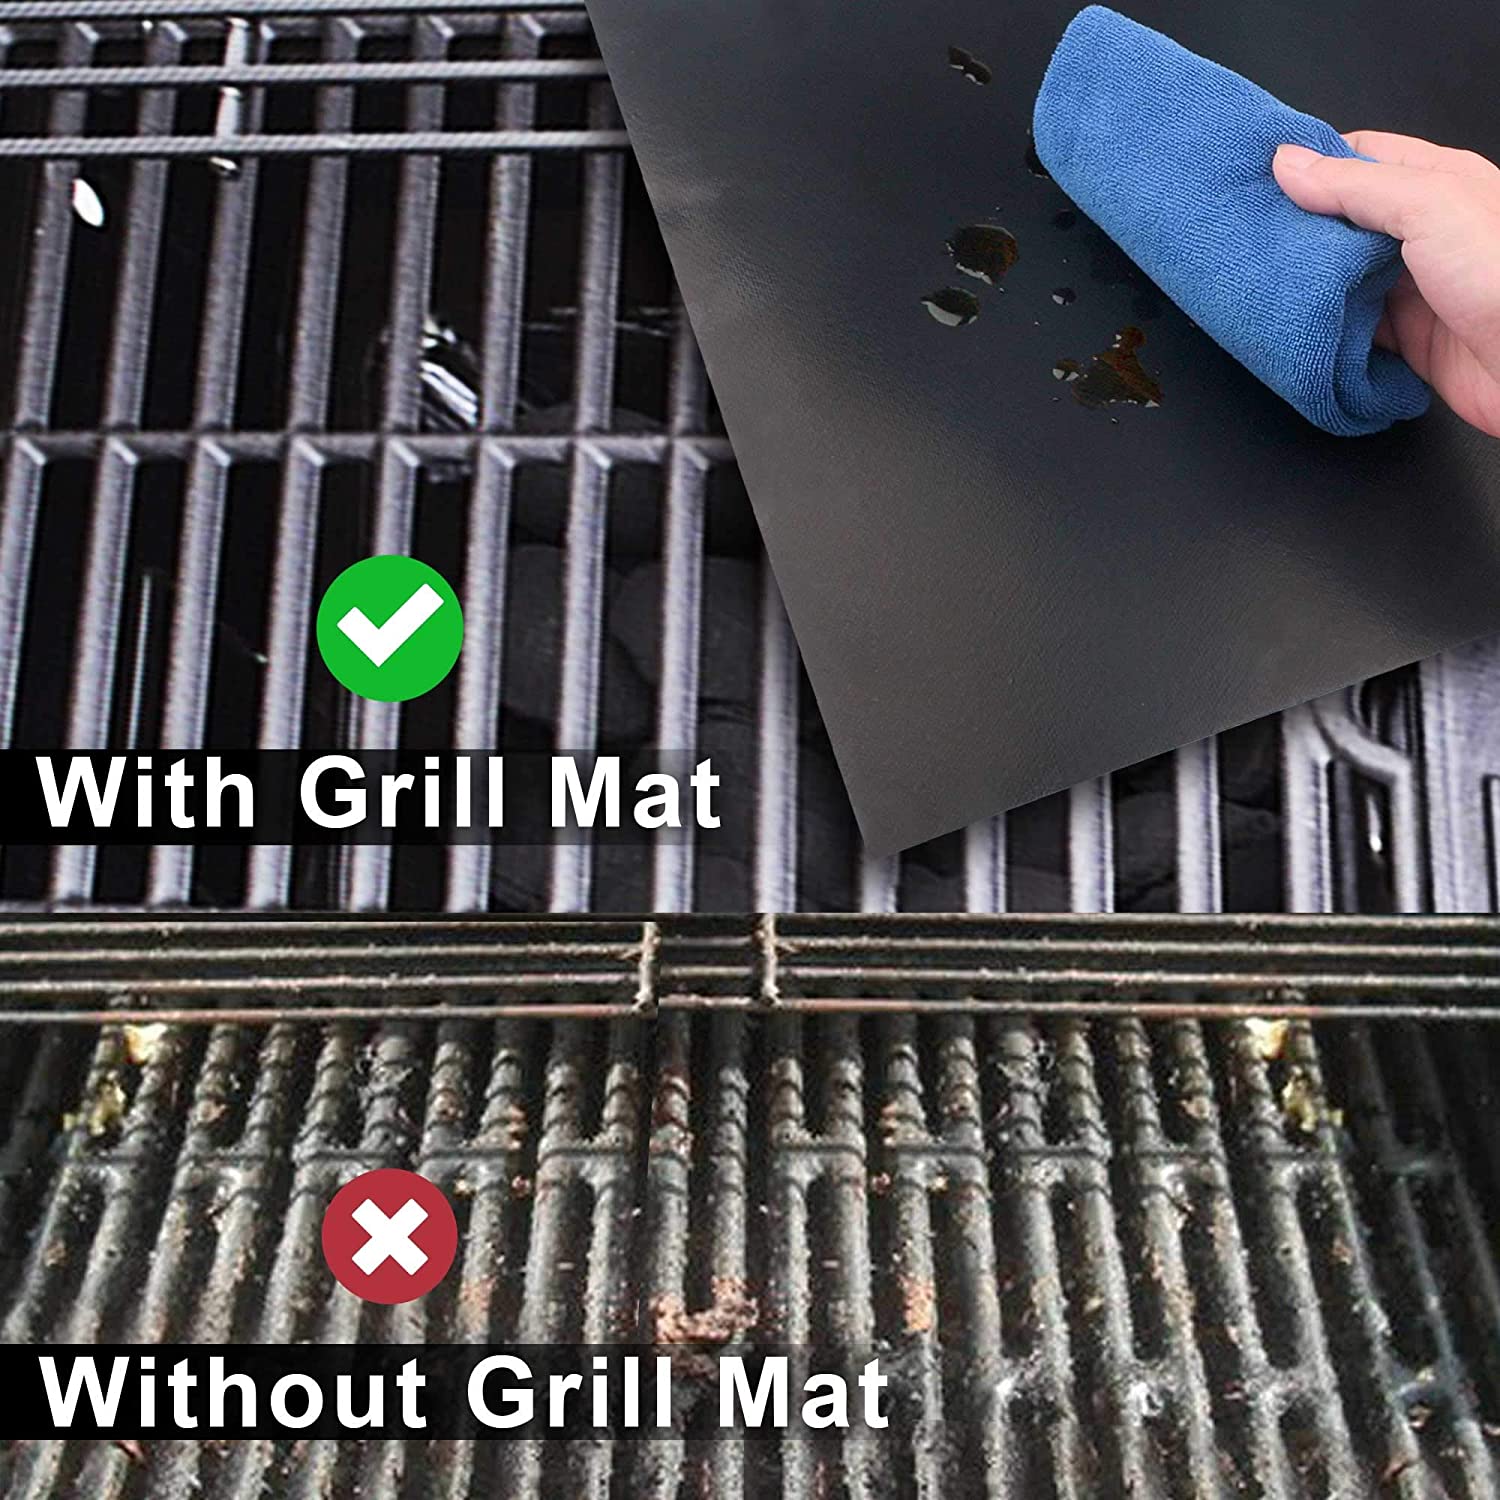 GRILLART Heavy Duty BBQ Grill Tools Set, Best Grilling Gifts for